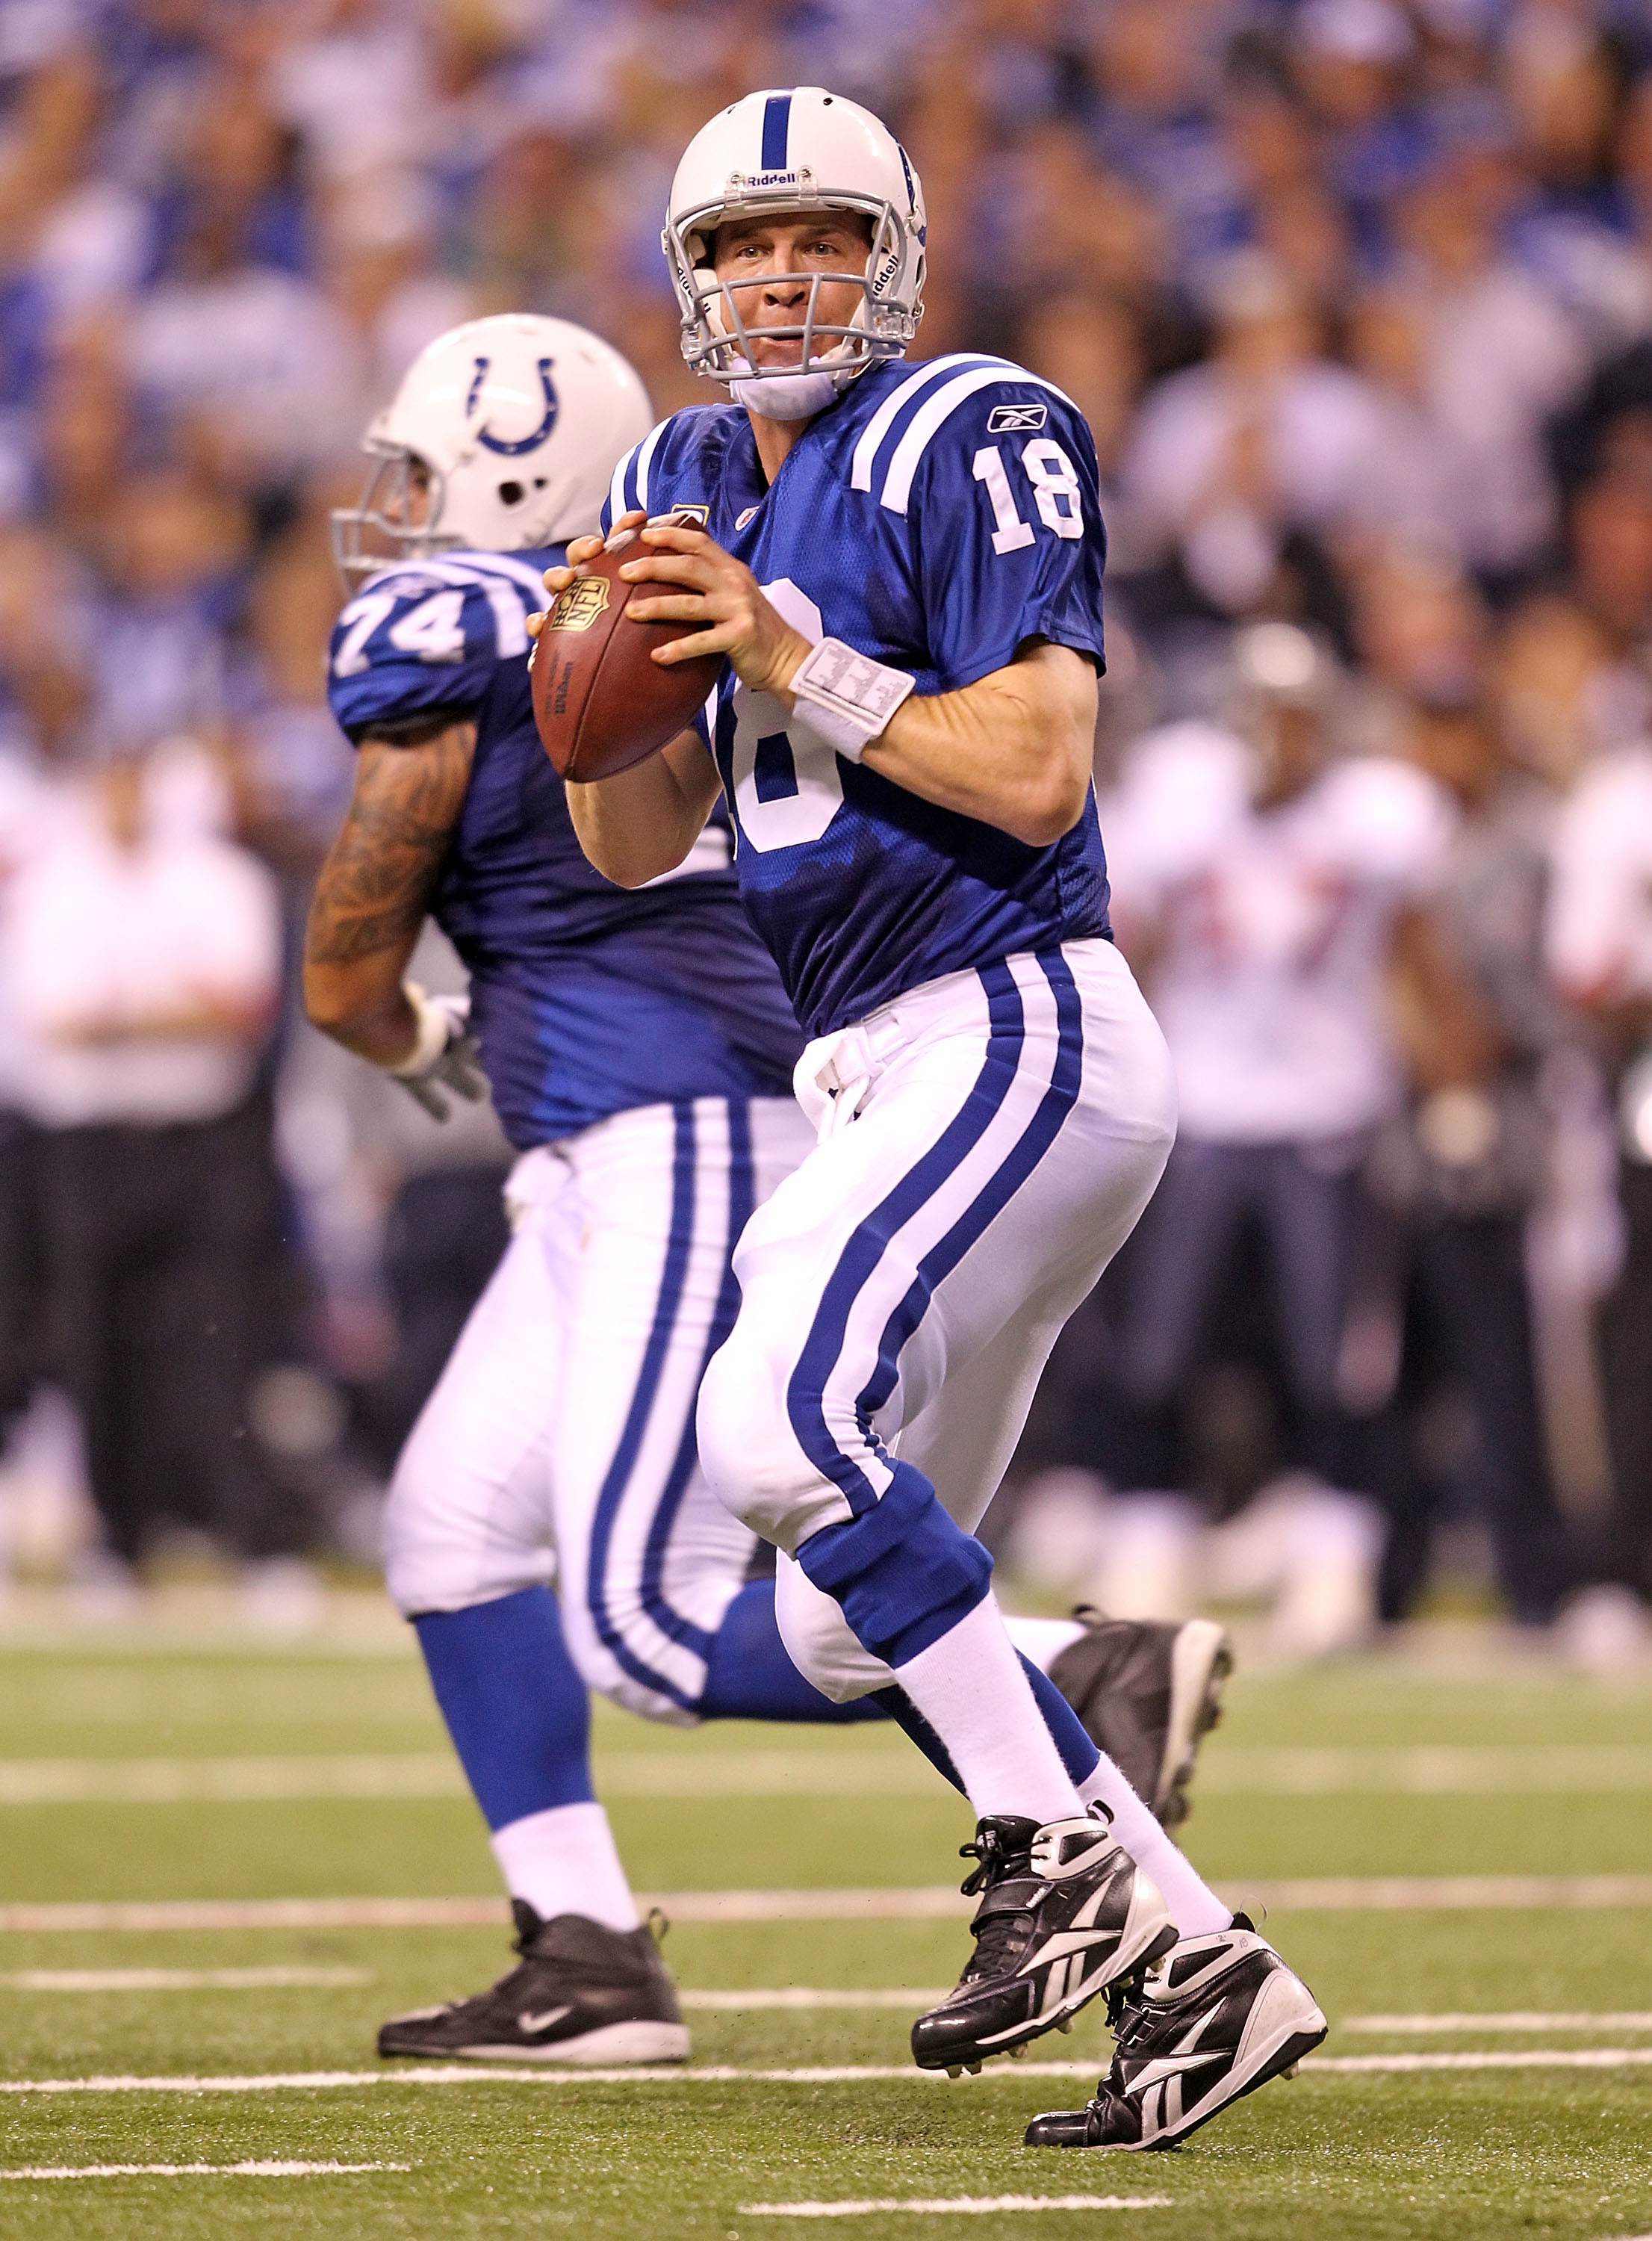 INDIANAPOLIS - NOVEMBER 01:  Peyton Manning #18 of Indianapolis Colts throws a pass during the NFL game against the Houston Texans  at Lucas Oil Stadium on November 1, 2010 in Indianapolis, Indiana.  (Photo by Andy Lyons/Getty Images)